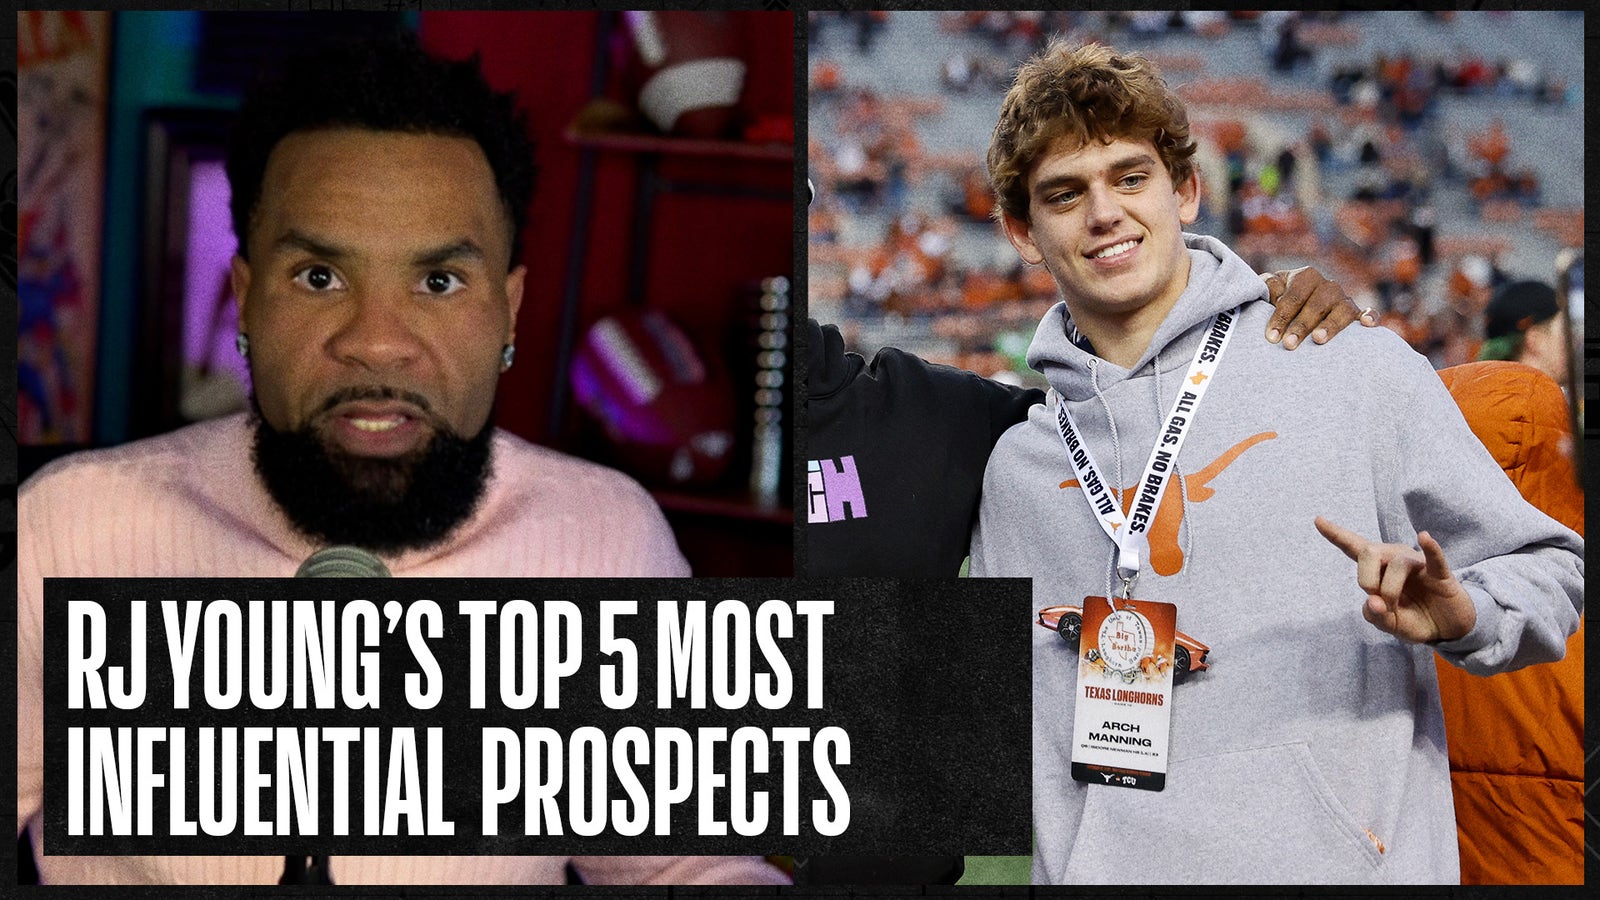 The Top 5 Most Influential Prospects